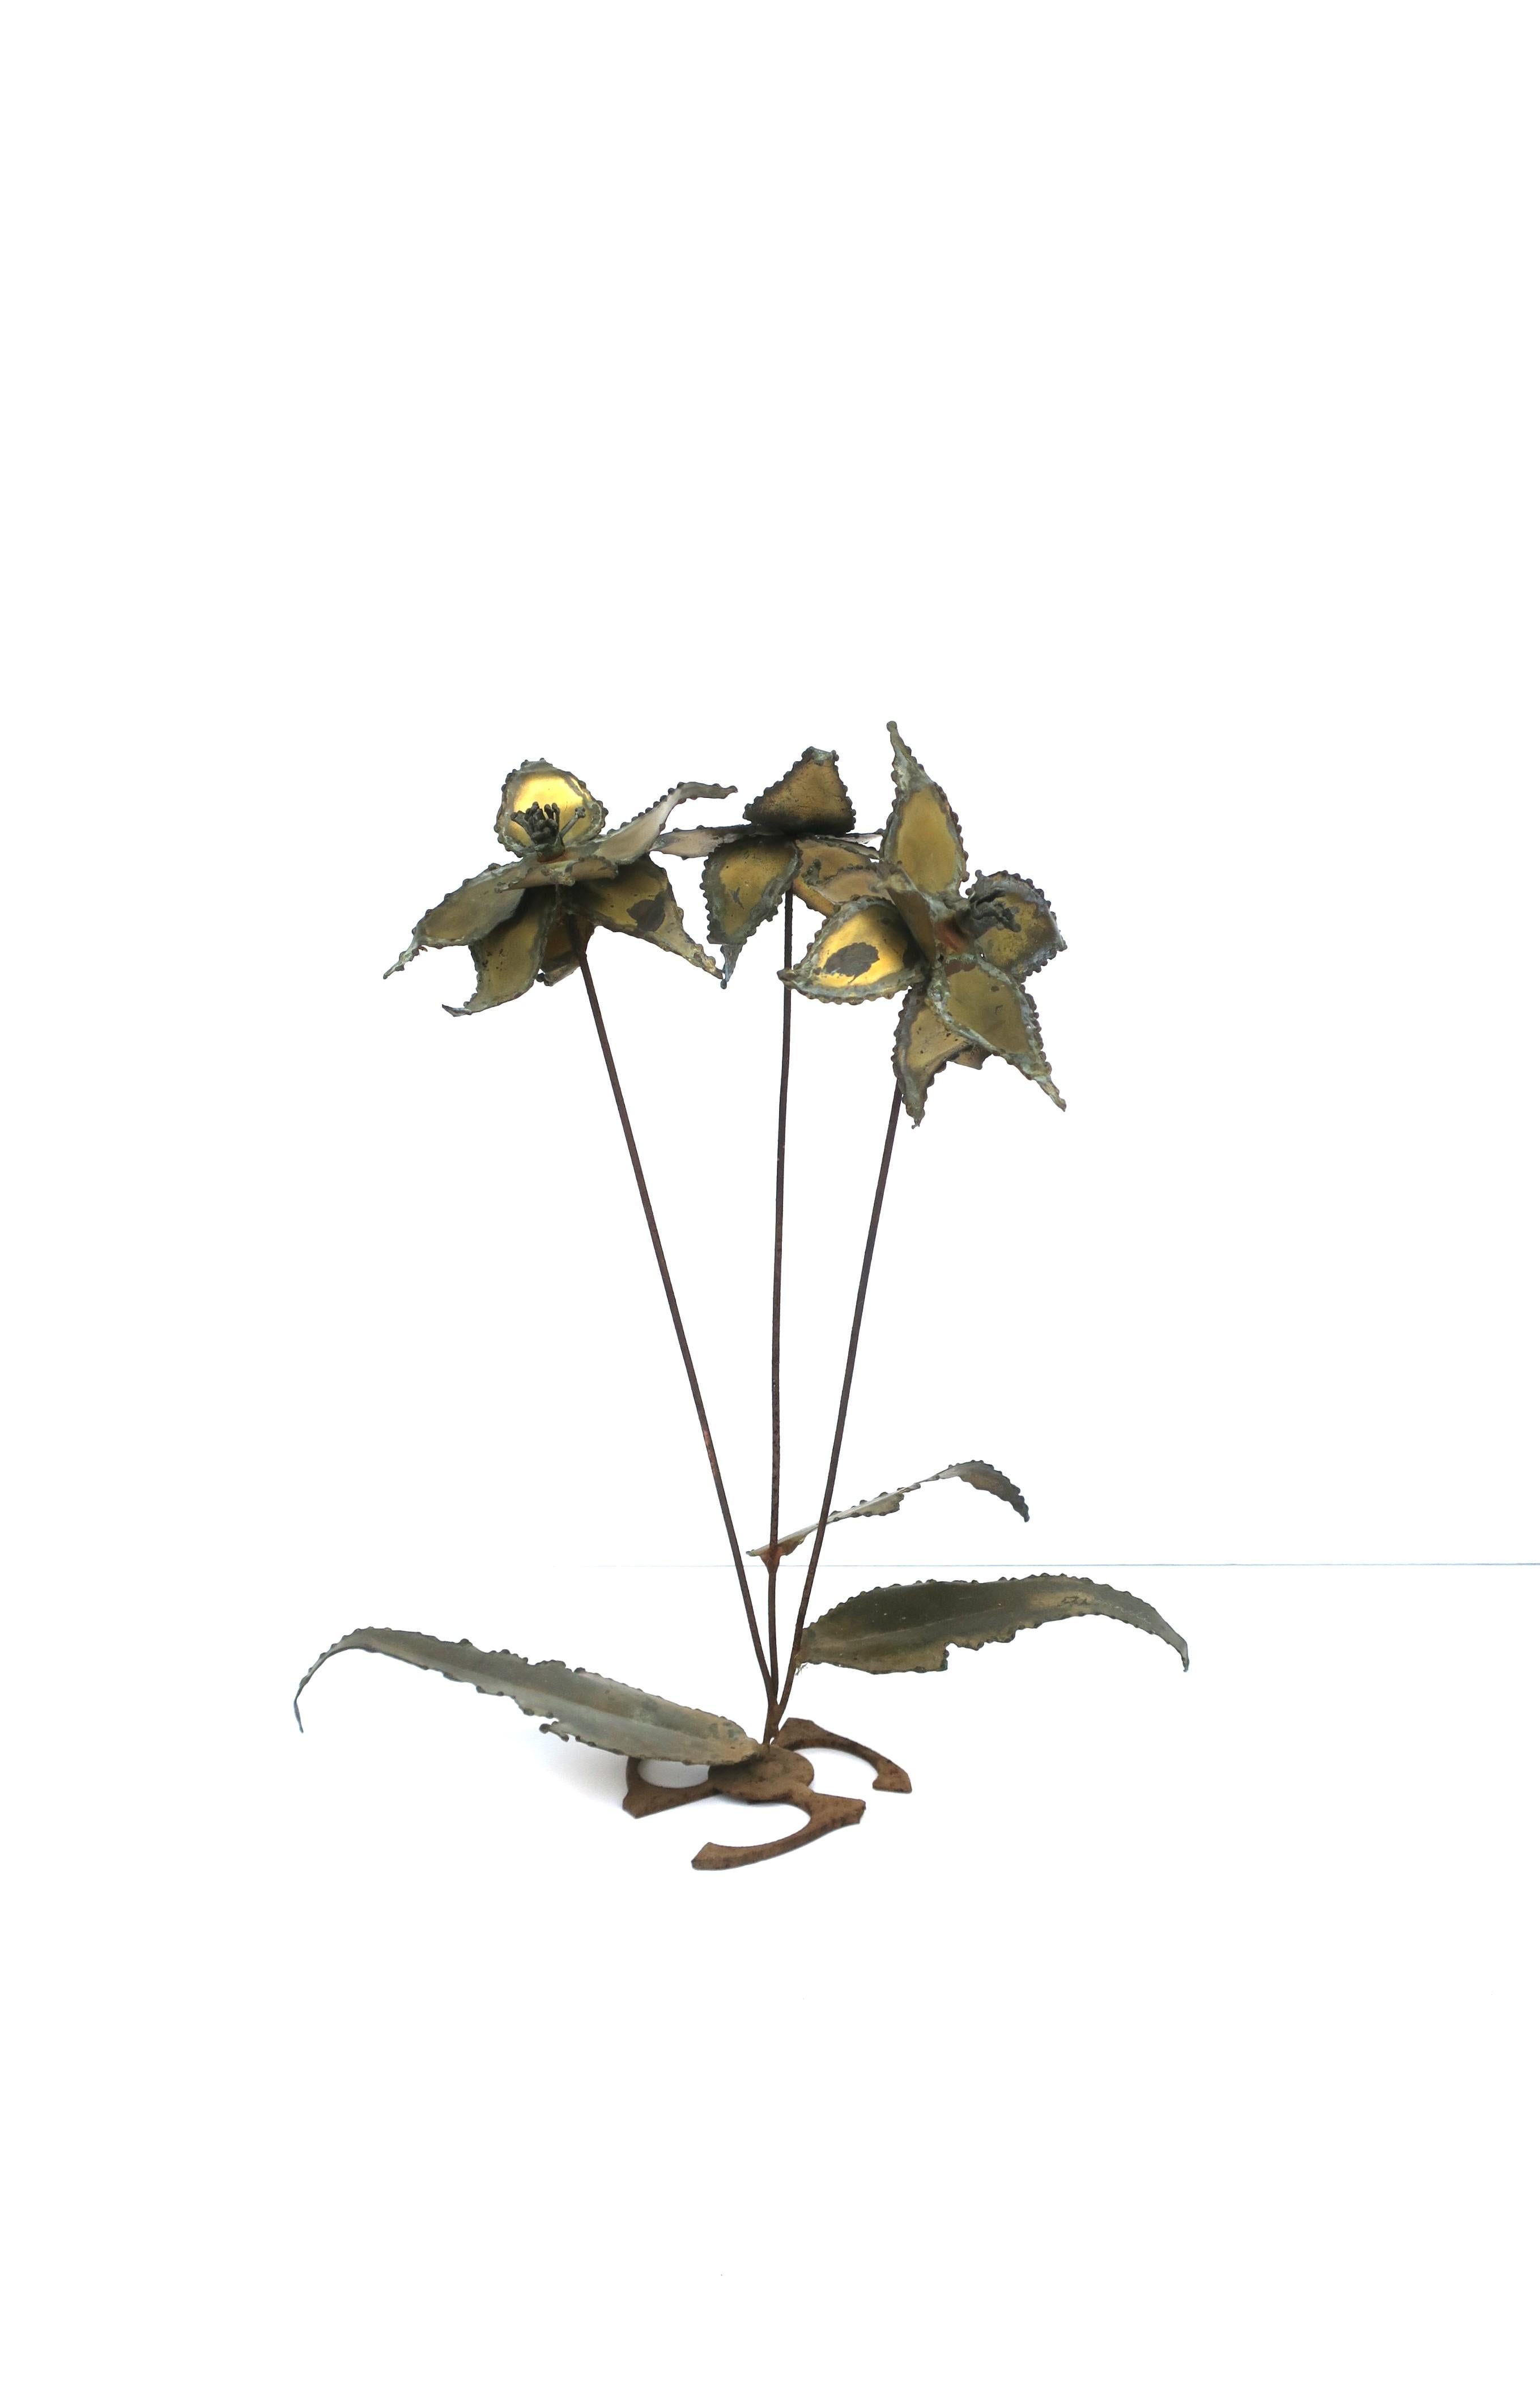 A signed brass and metal sculpture of flowers and leaves, Brutalist period, in the style of designers Silas Seandel or C. Jere, circa mid-20th century. A Brutalist sculpture of flowers and leaves in a distressed patinated brass and metal. Piece is